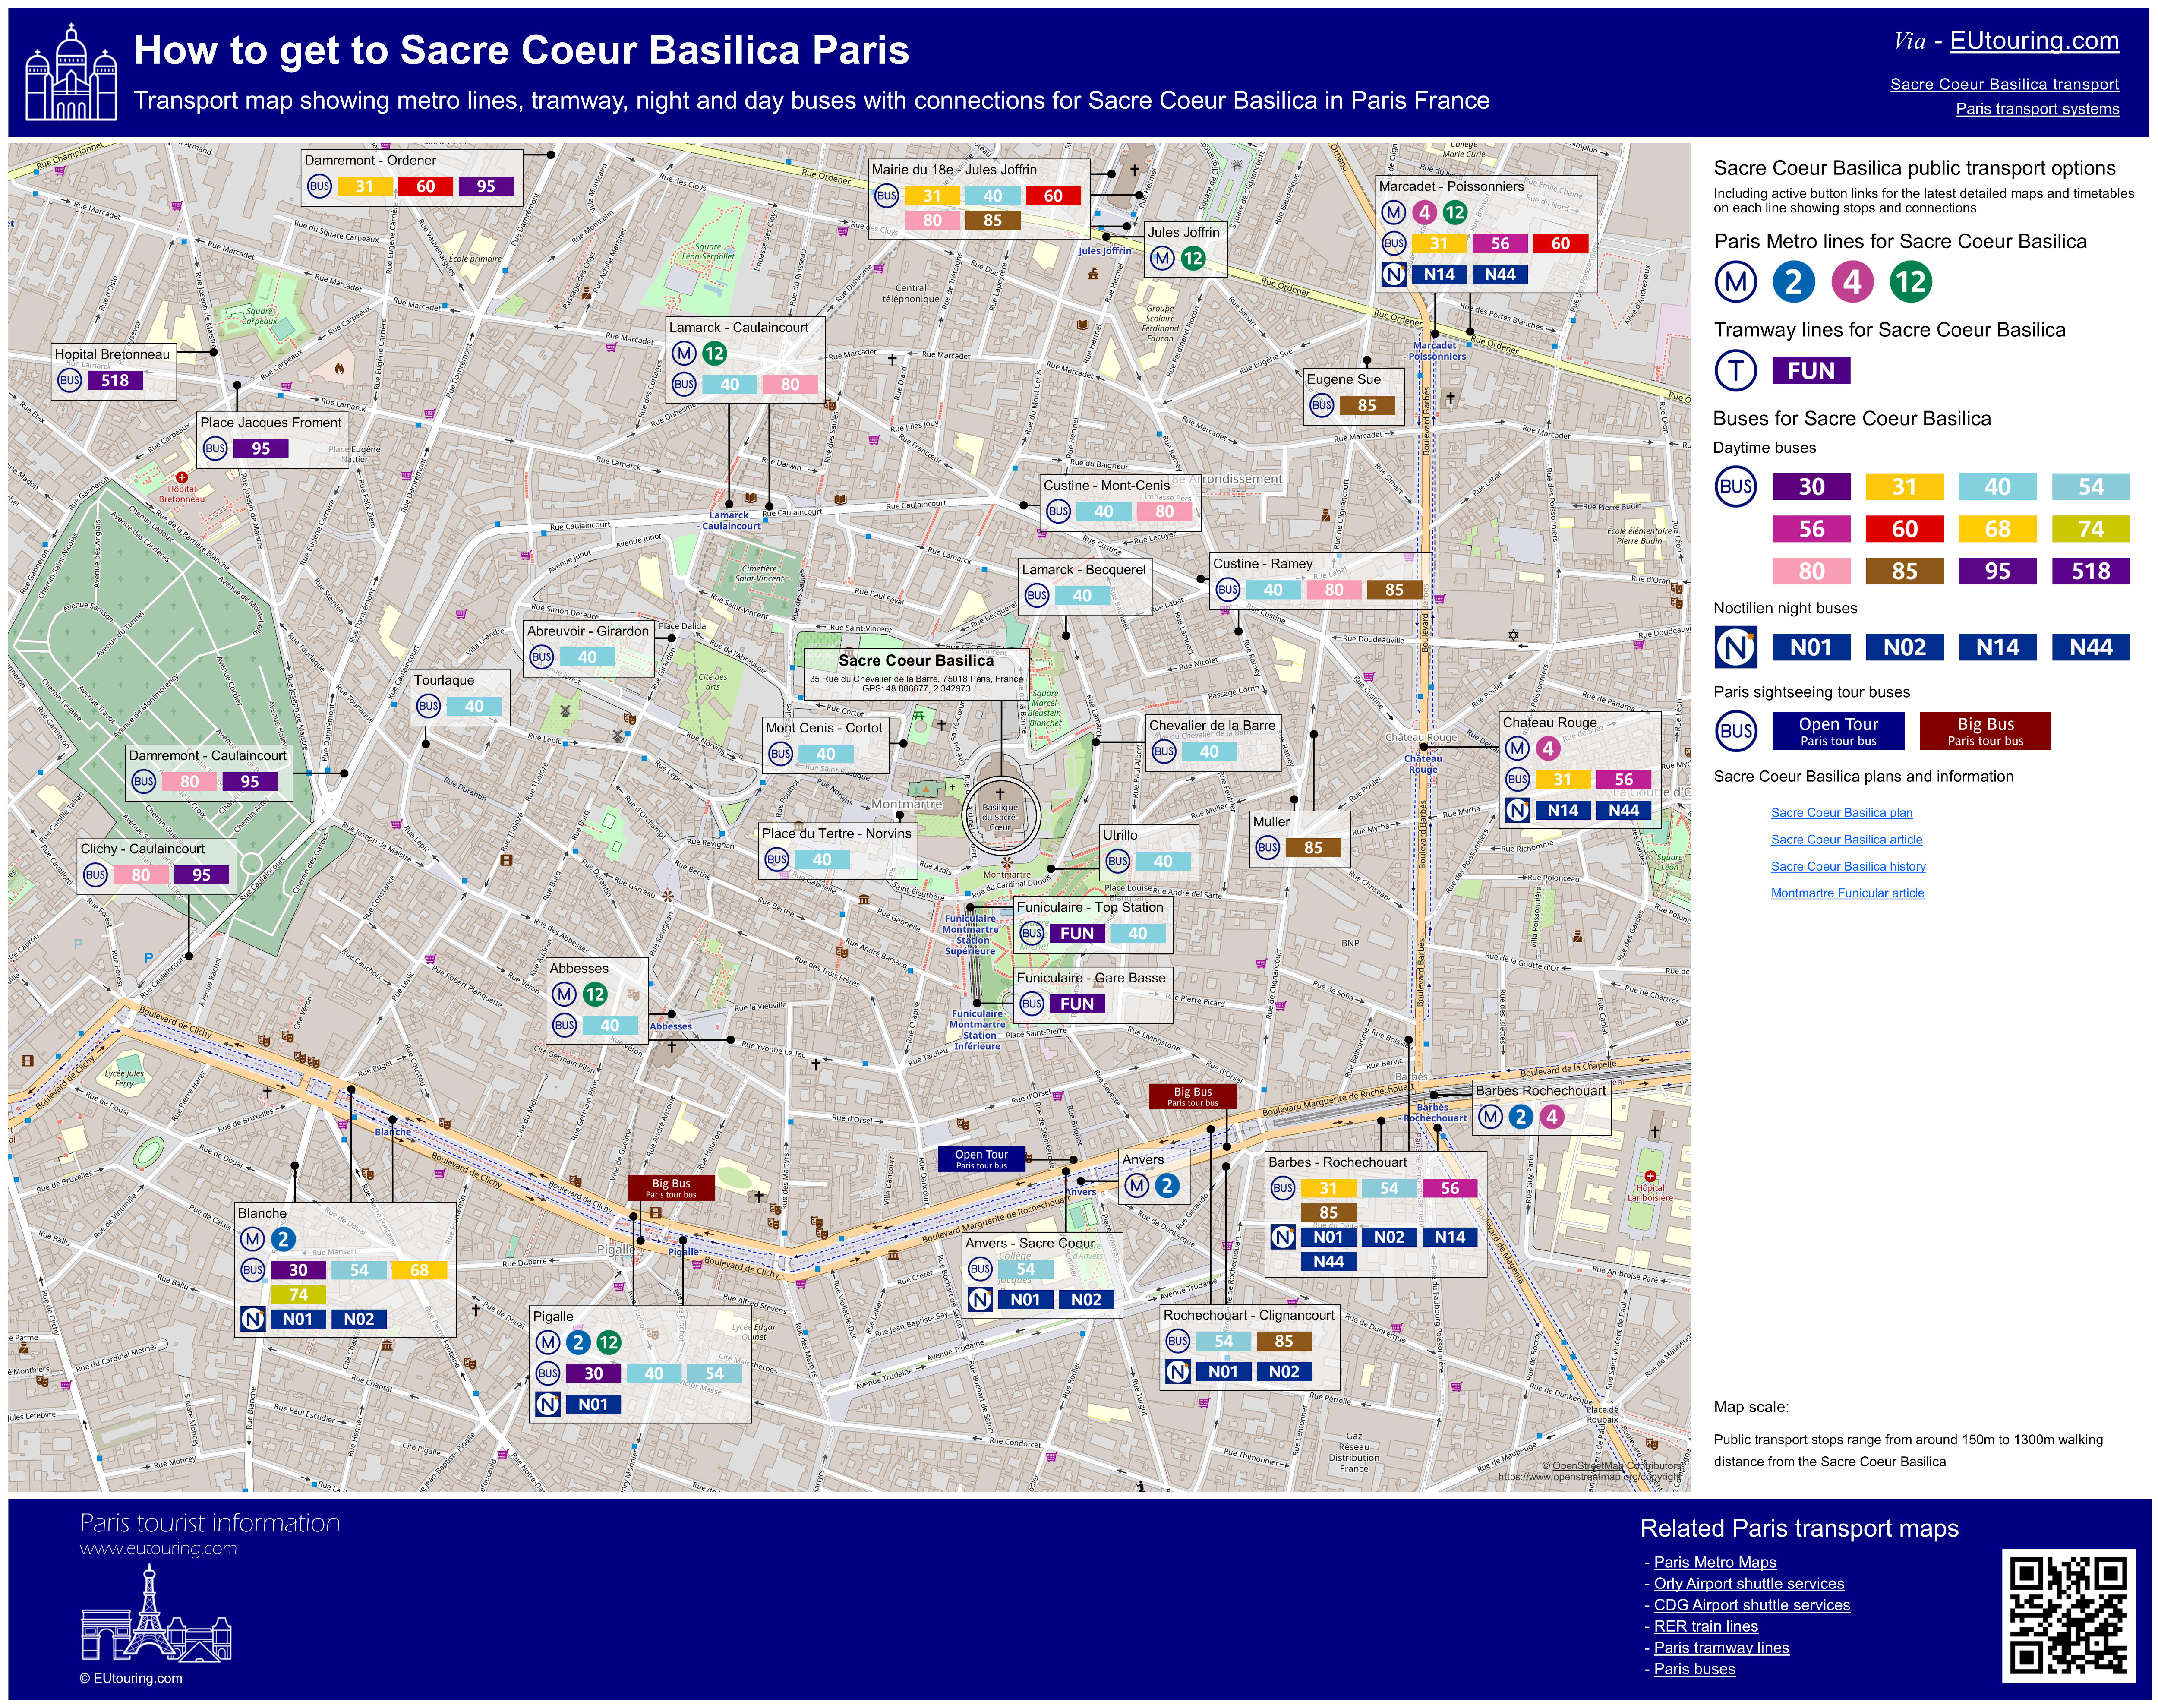 How To Get To Sacre Coeur Basilica In Paris Using Public Transport